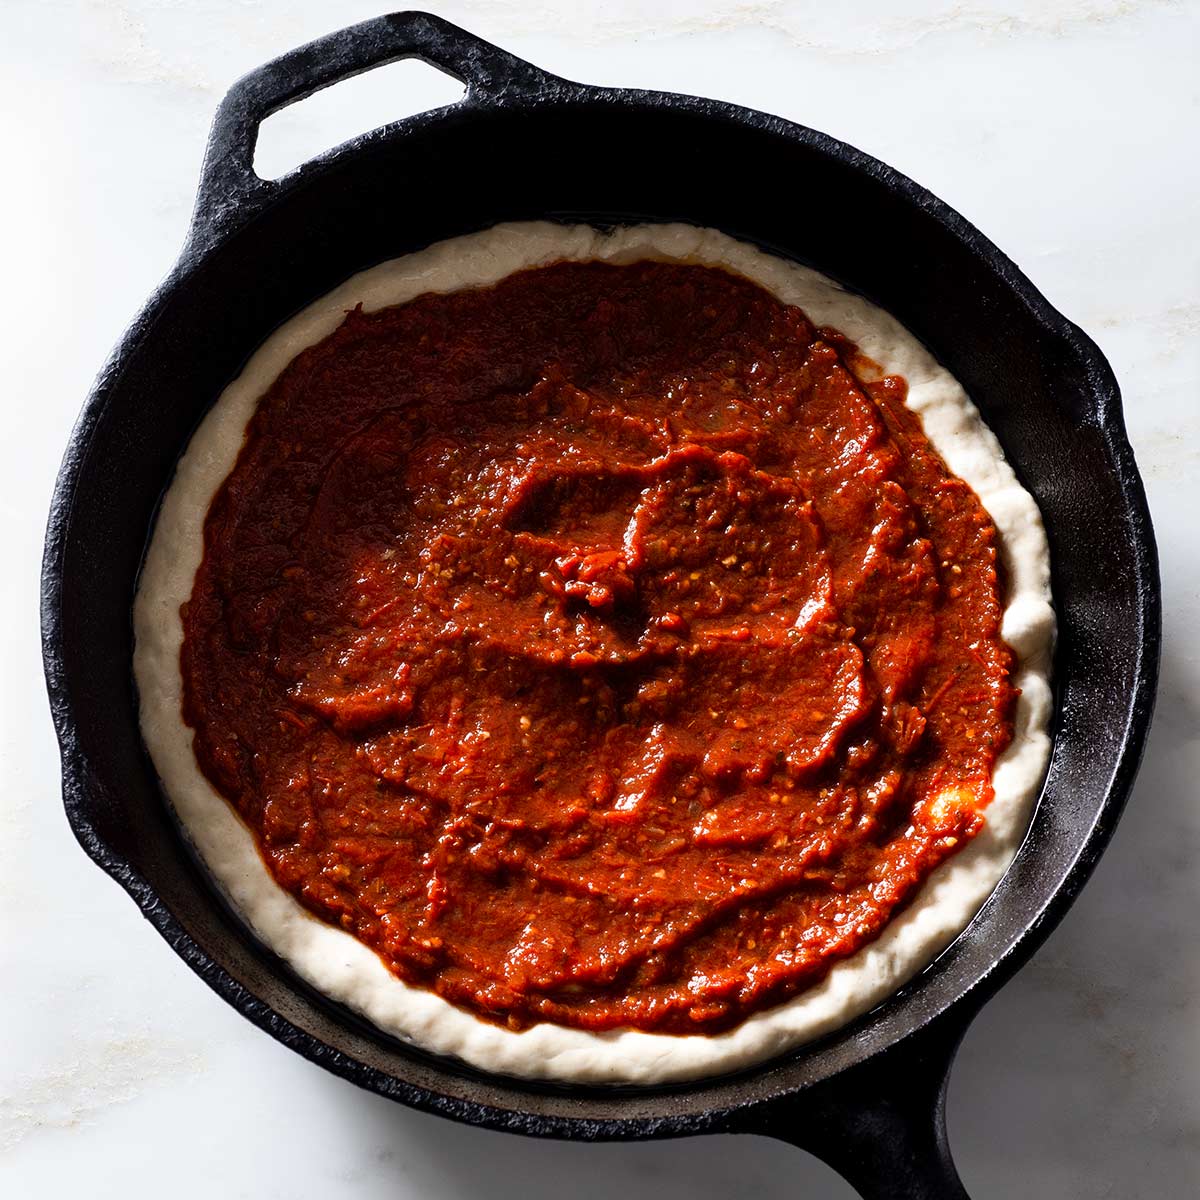 Raw pizza dough with chipotle pizza sauce in a cast iron pan.